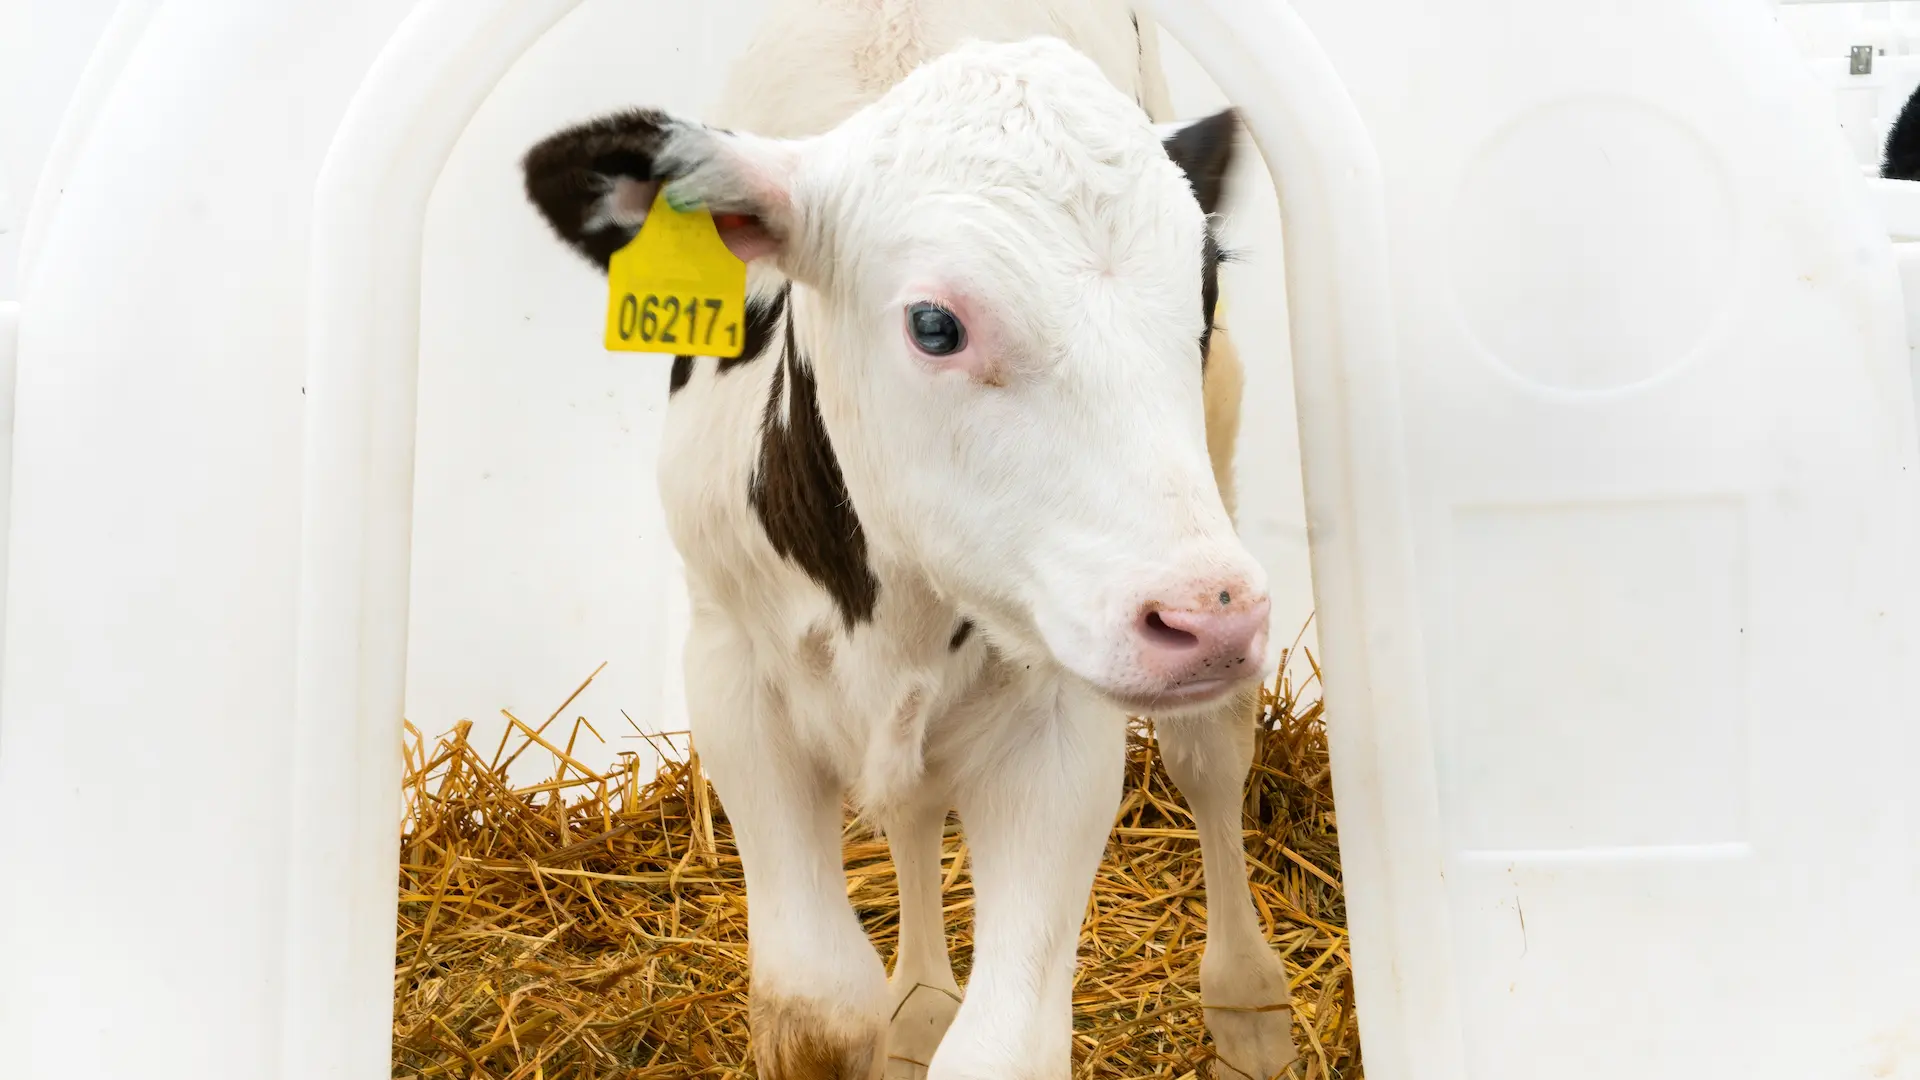 Holstein calf with ear tag close-up